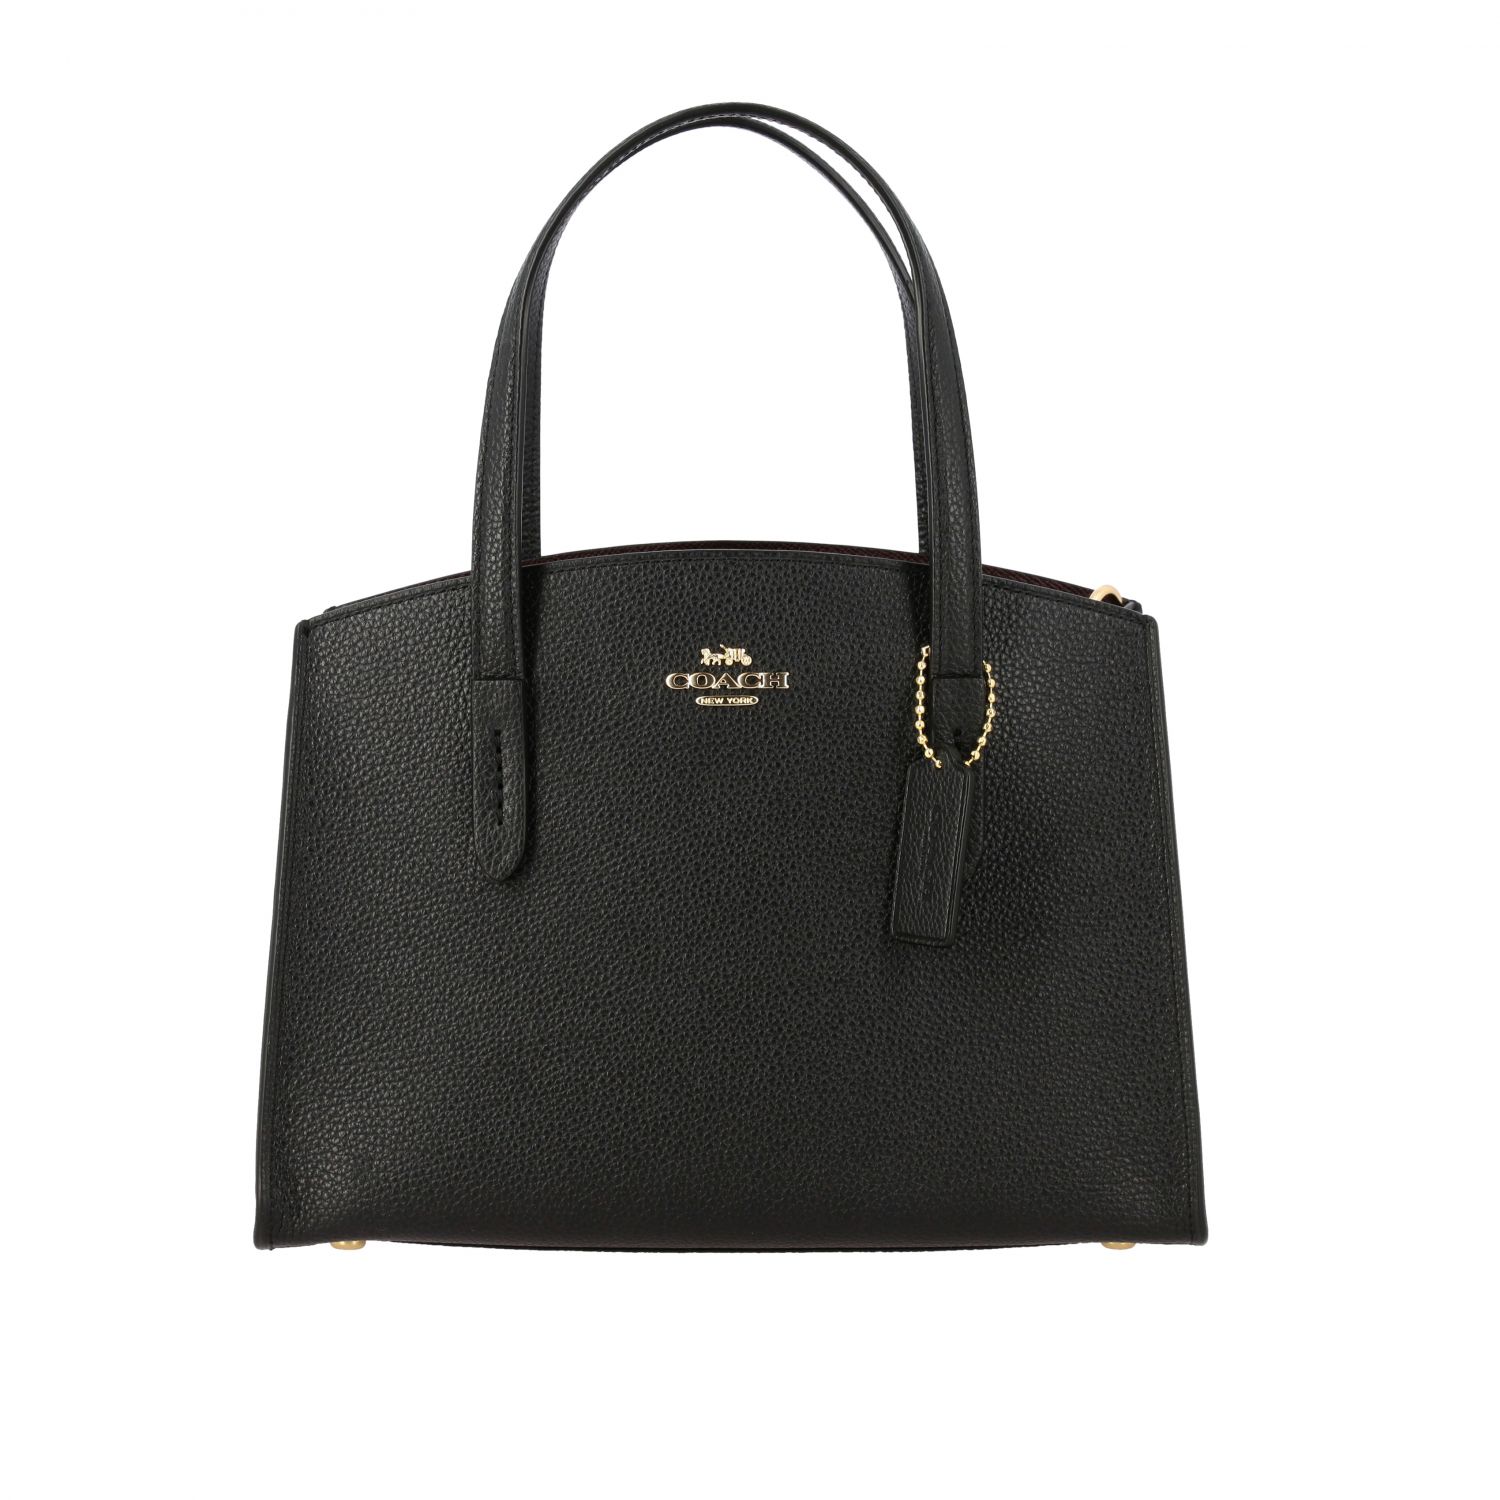 Coach Outlet: Charlie shopping bag in grained leather - Black | Coach ...